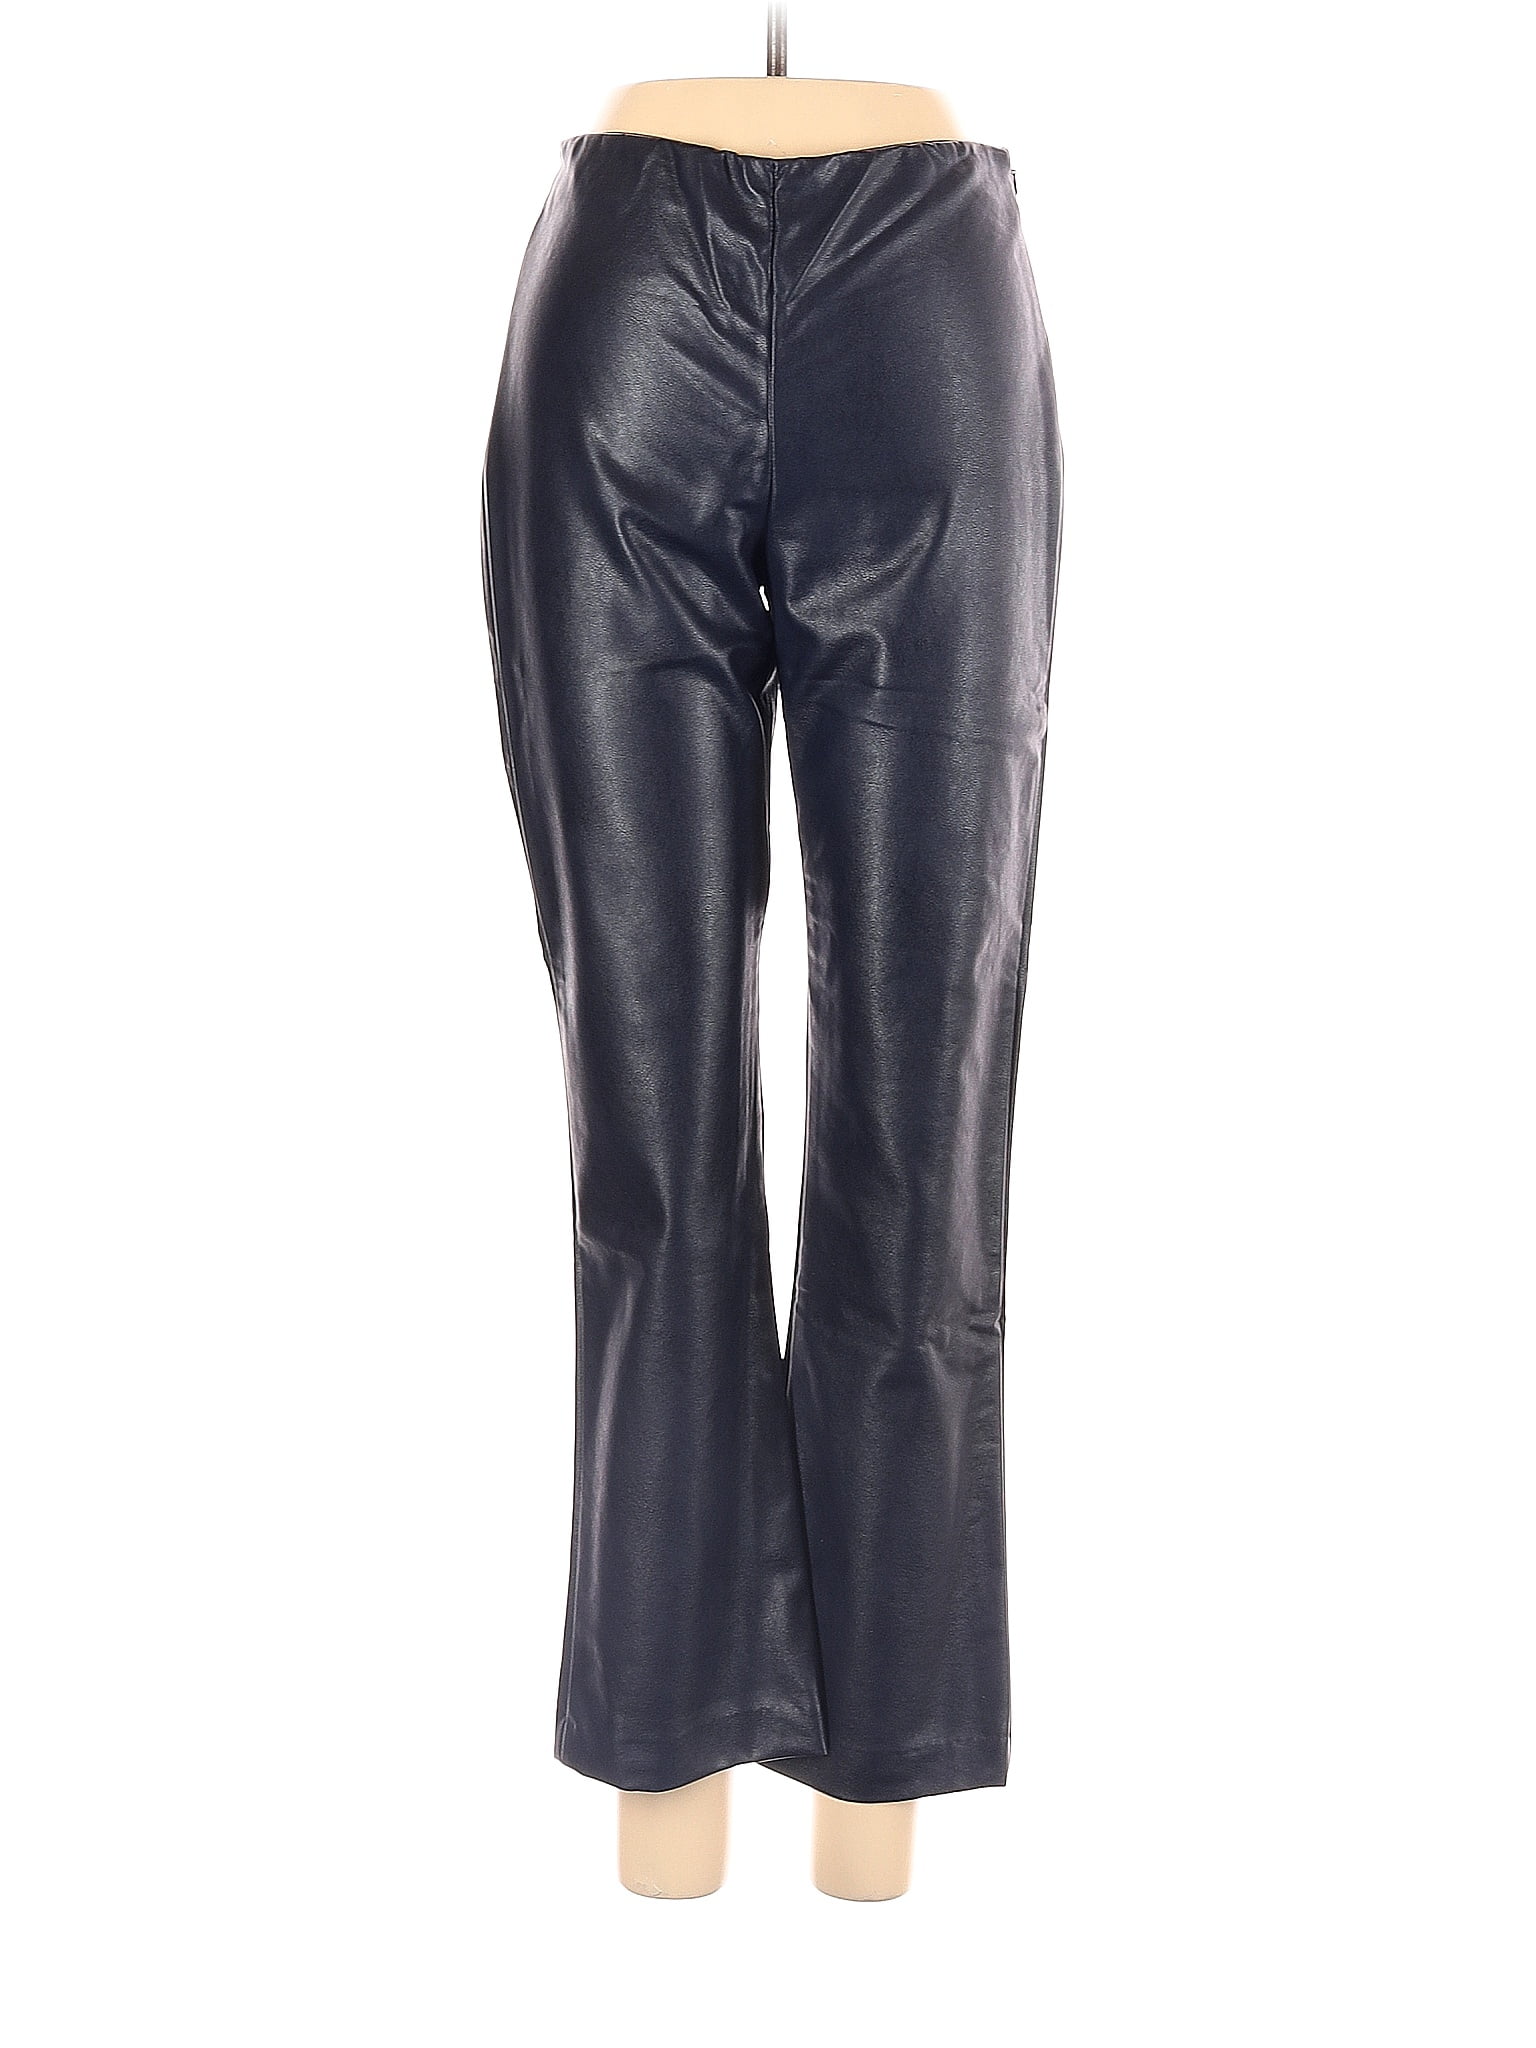 Tuckernuck 100% Polyester Solid Blue Faux Leather Pants Size S - 78% ...